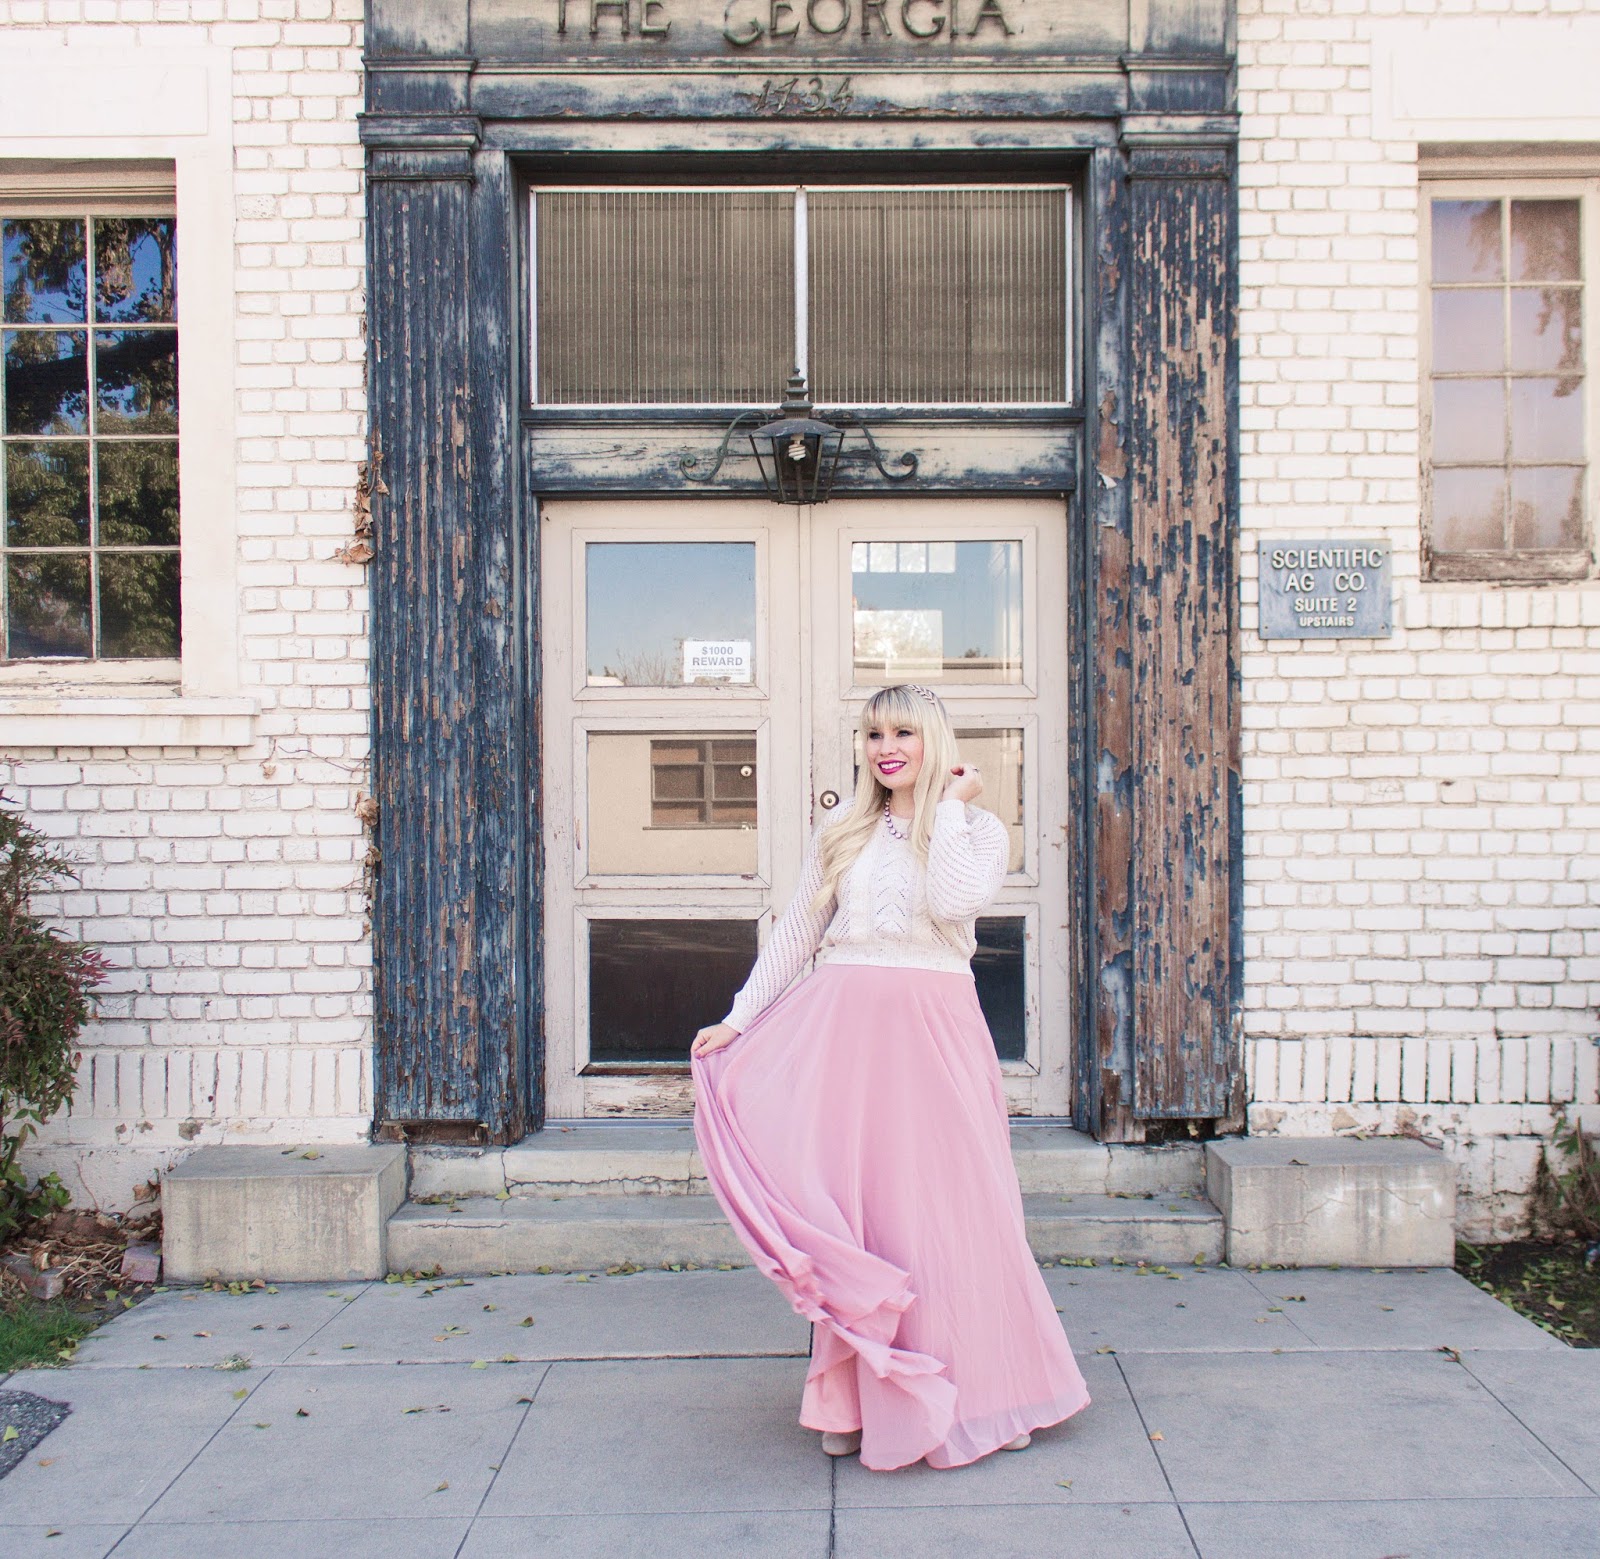 A Day in the Life of a Fashion Blogger by popular California fashion blogger Lizzie in Lace